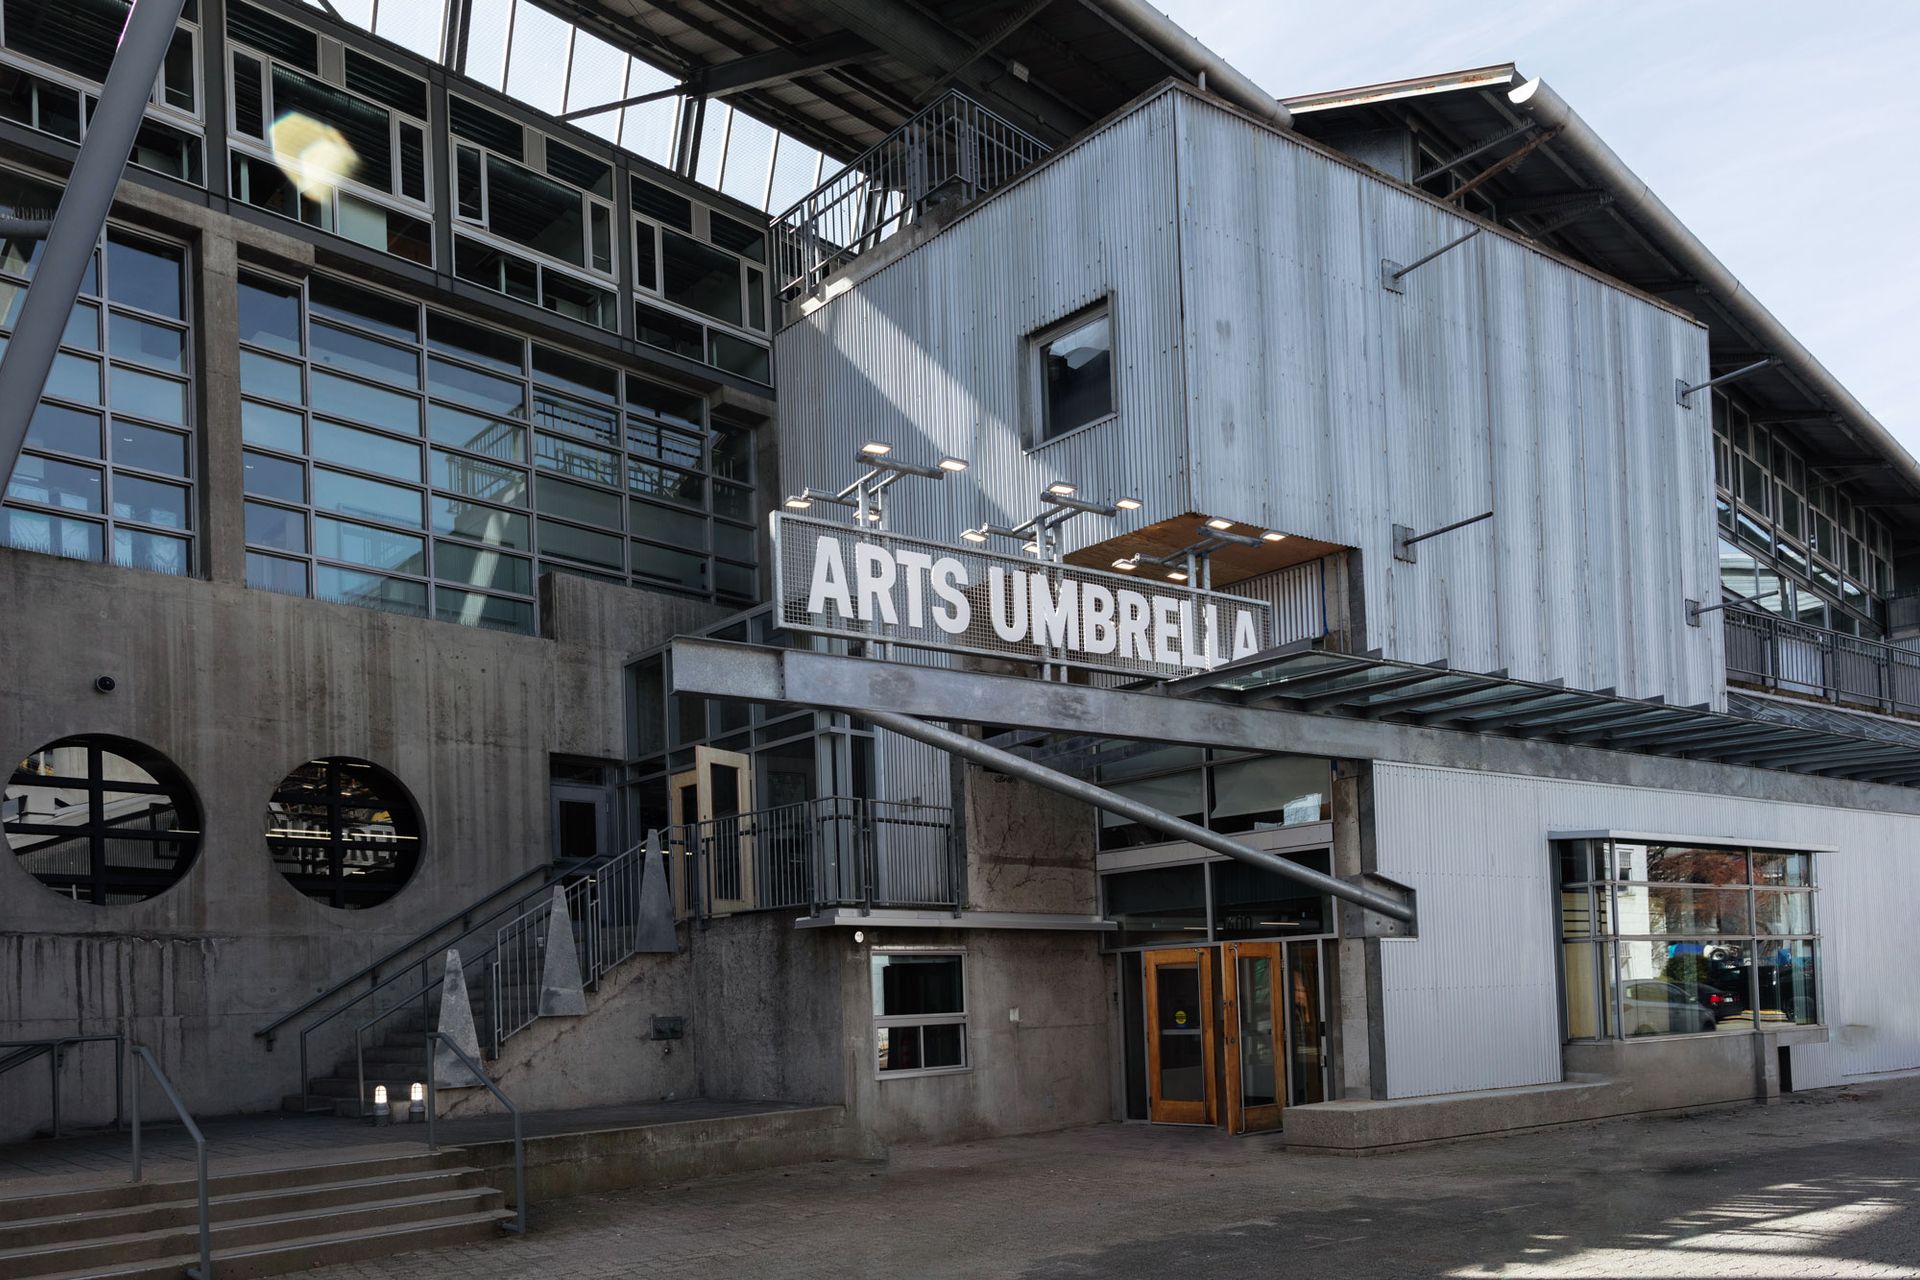 Arts Umbrella moved into the building that previously housed the Emily Carr University of Art and Design on Granville Island, a former industrial area along the waterfront redeveloped in the 1970s Photo: Kevin Clark Studios